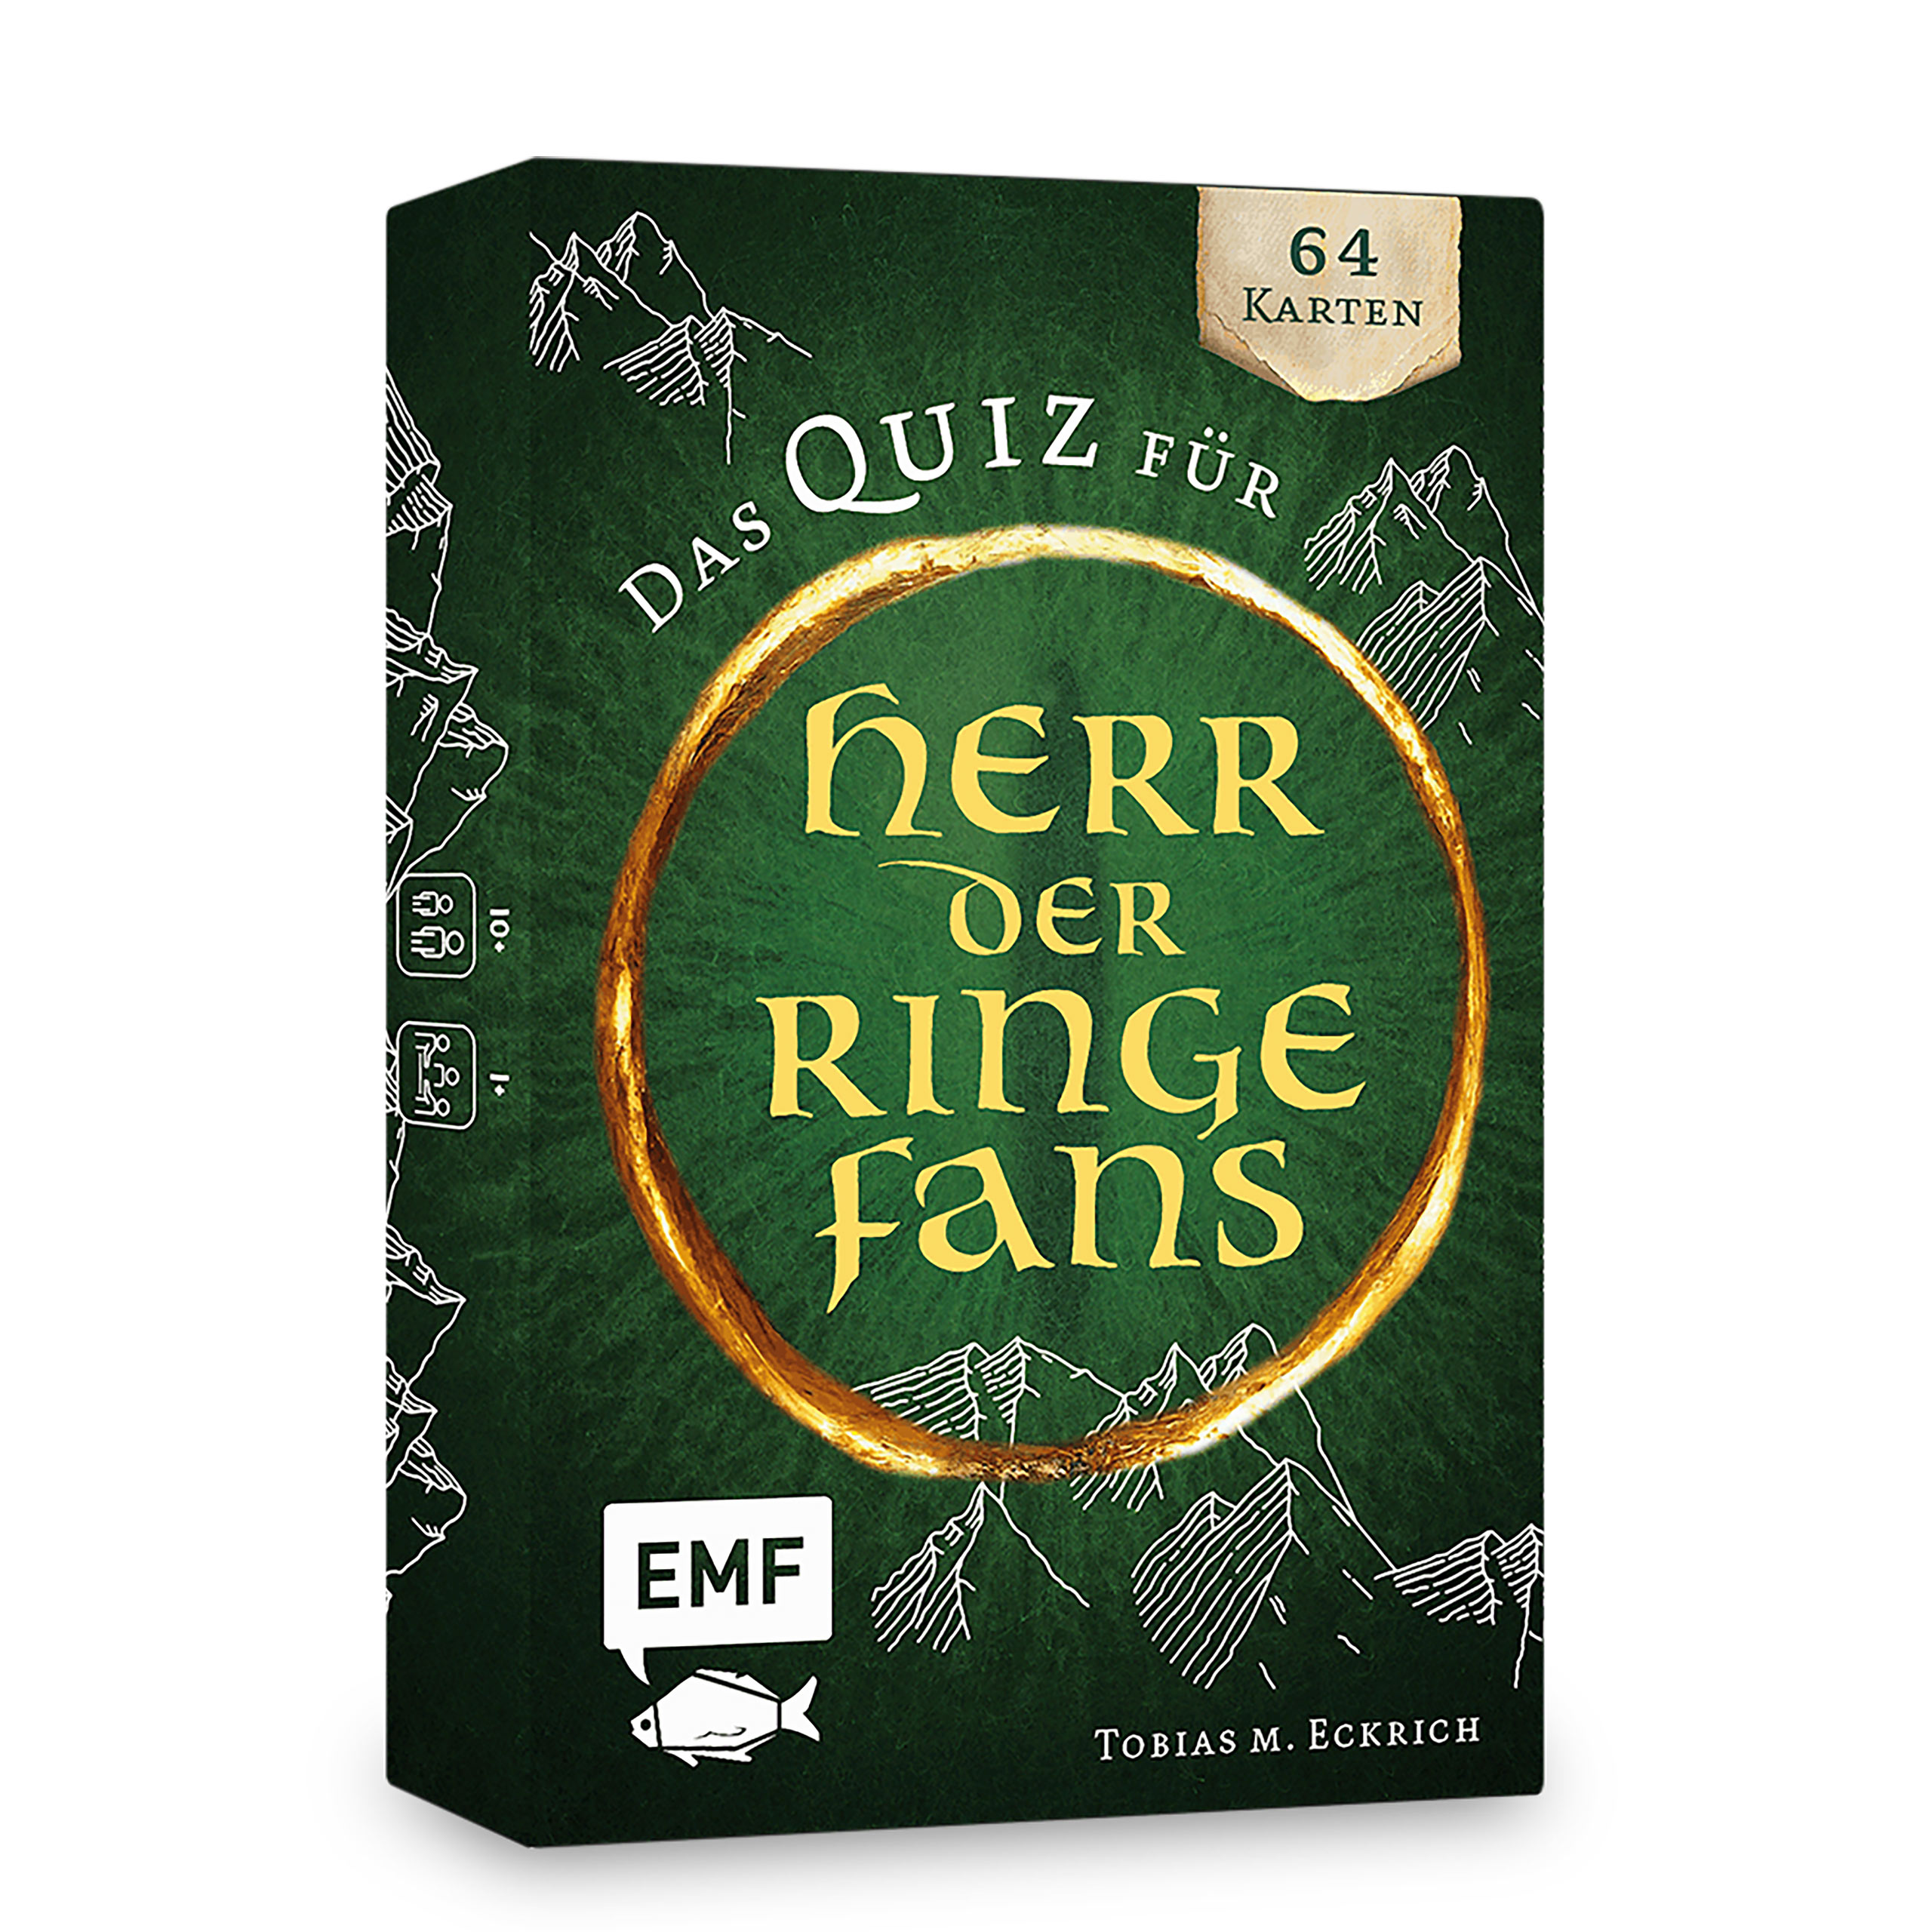 The unofficial quiz for Lord of the Rings fans - Playing cards